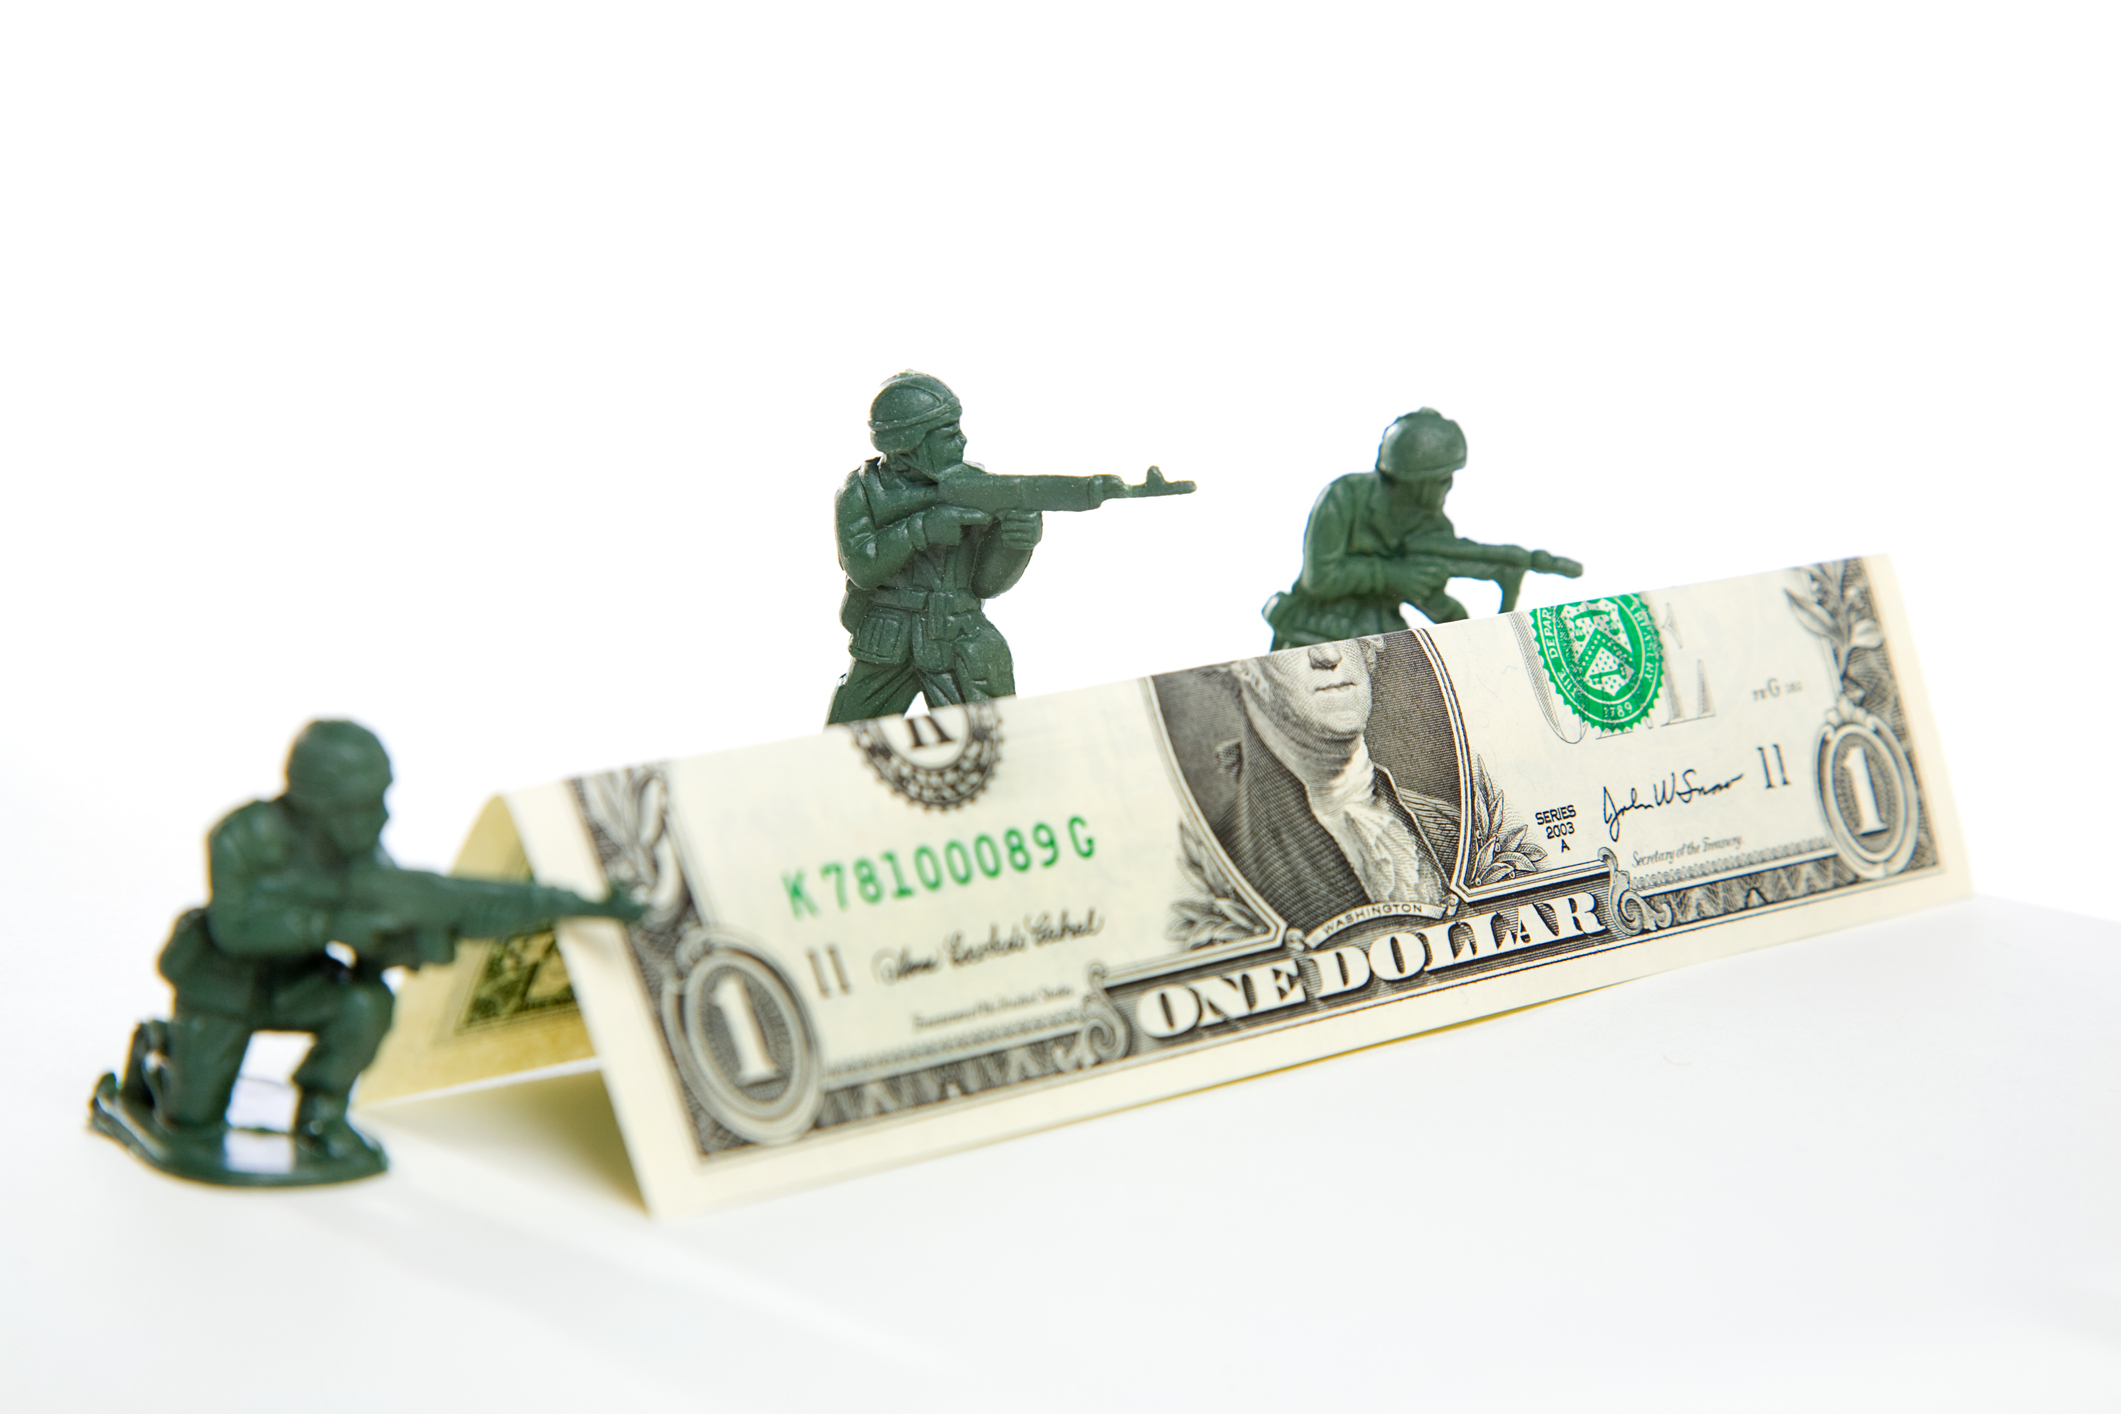 Three plastic toy soldiers shooting over a barricade made of a folded dollar bill